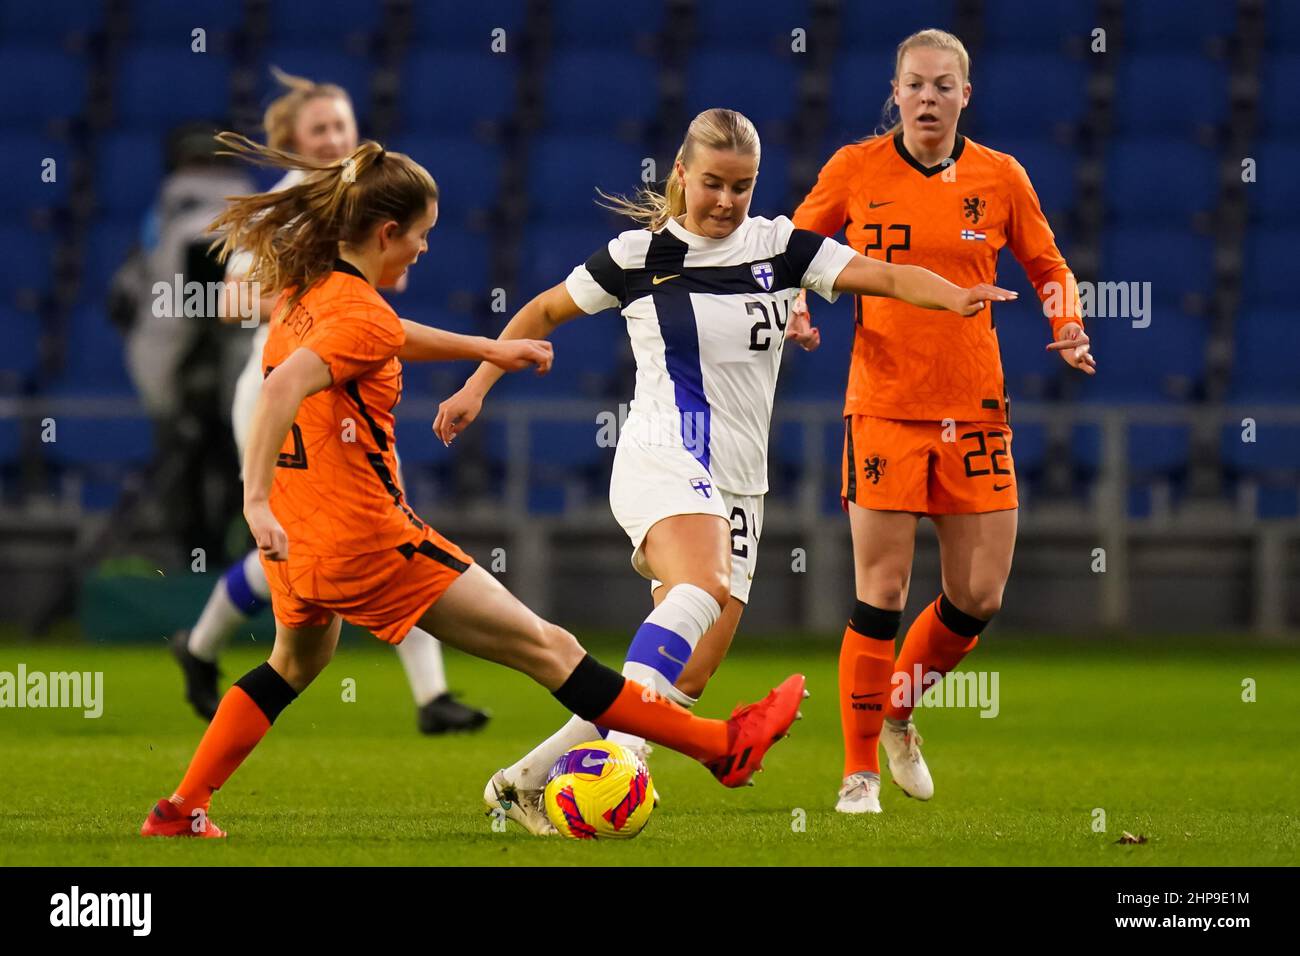 LE HAVRE, FRANCE - FEBRUARY 19: Kayleigh van Dooren of the Netherlands challenges Amanda Rantanen of Finland during the Tournoi de France 2022 match between Finland and Netherlands at Stade Oceane on February 19, 2022 in Le Havre, France (Photo by Rene Nijhuis/Orange Pictures) Stock Photo